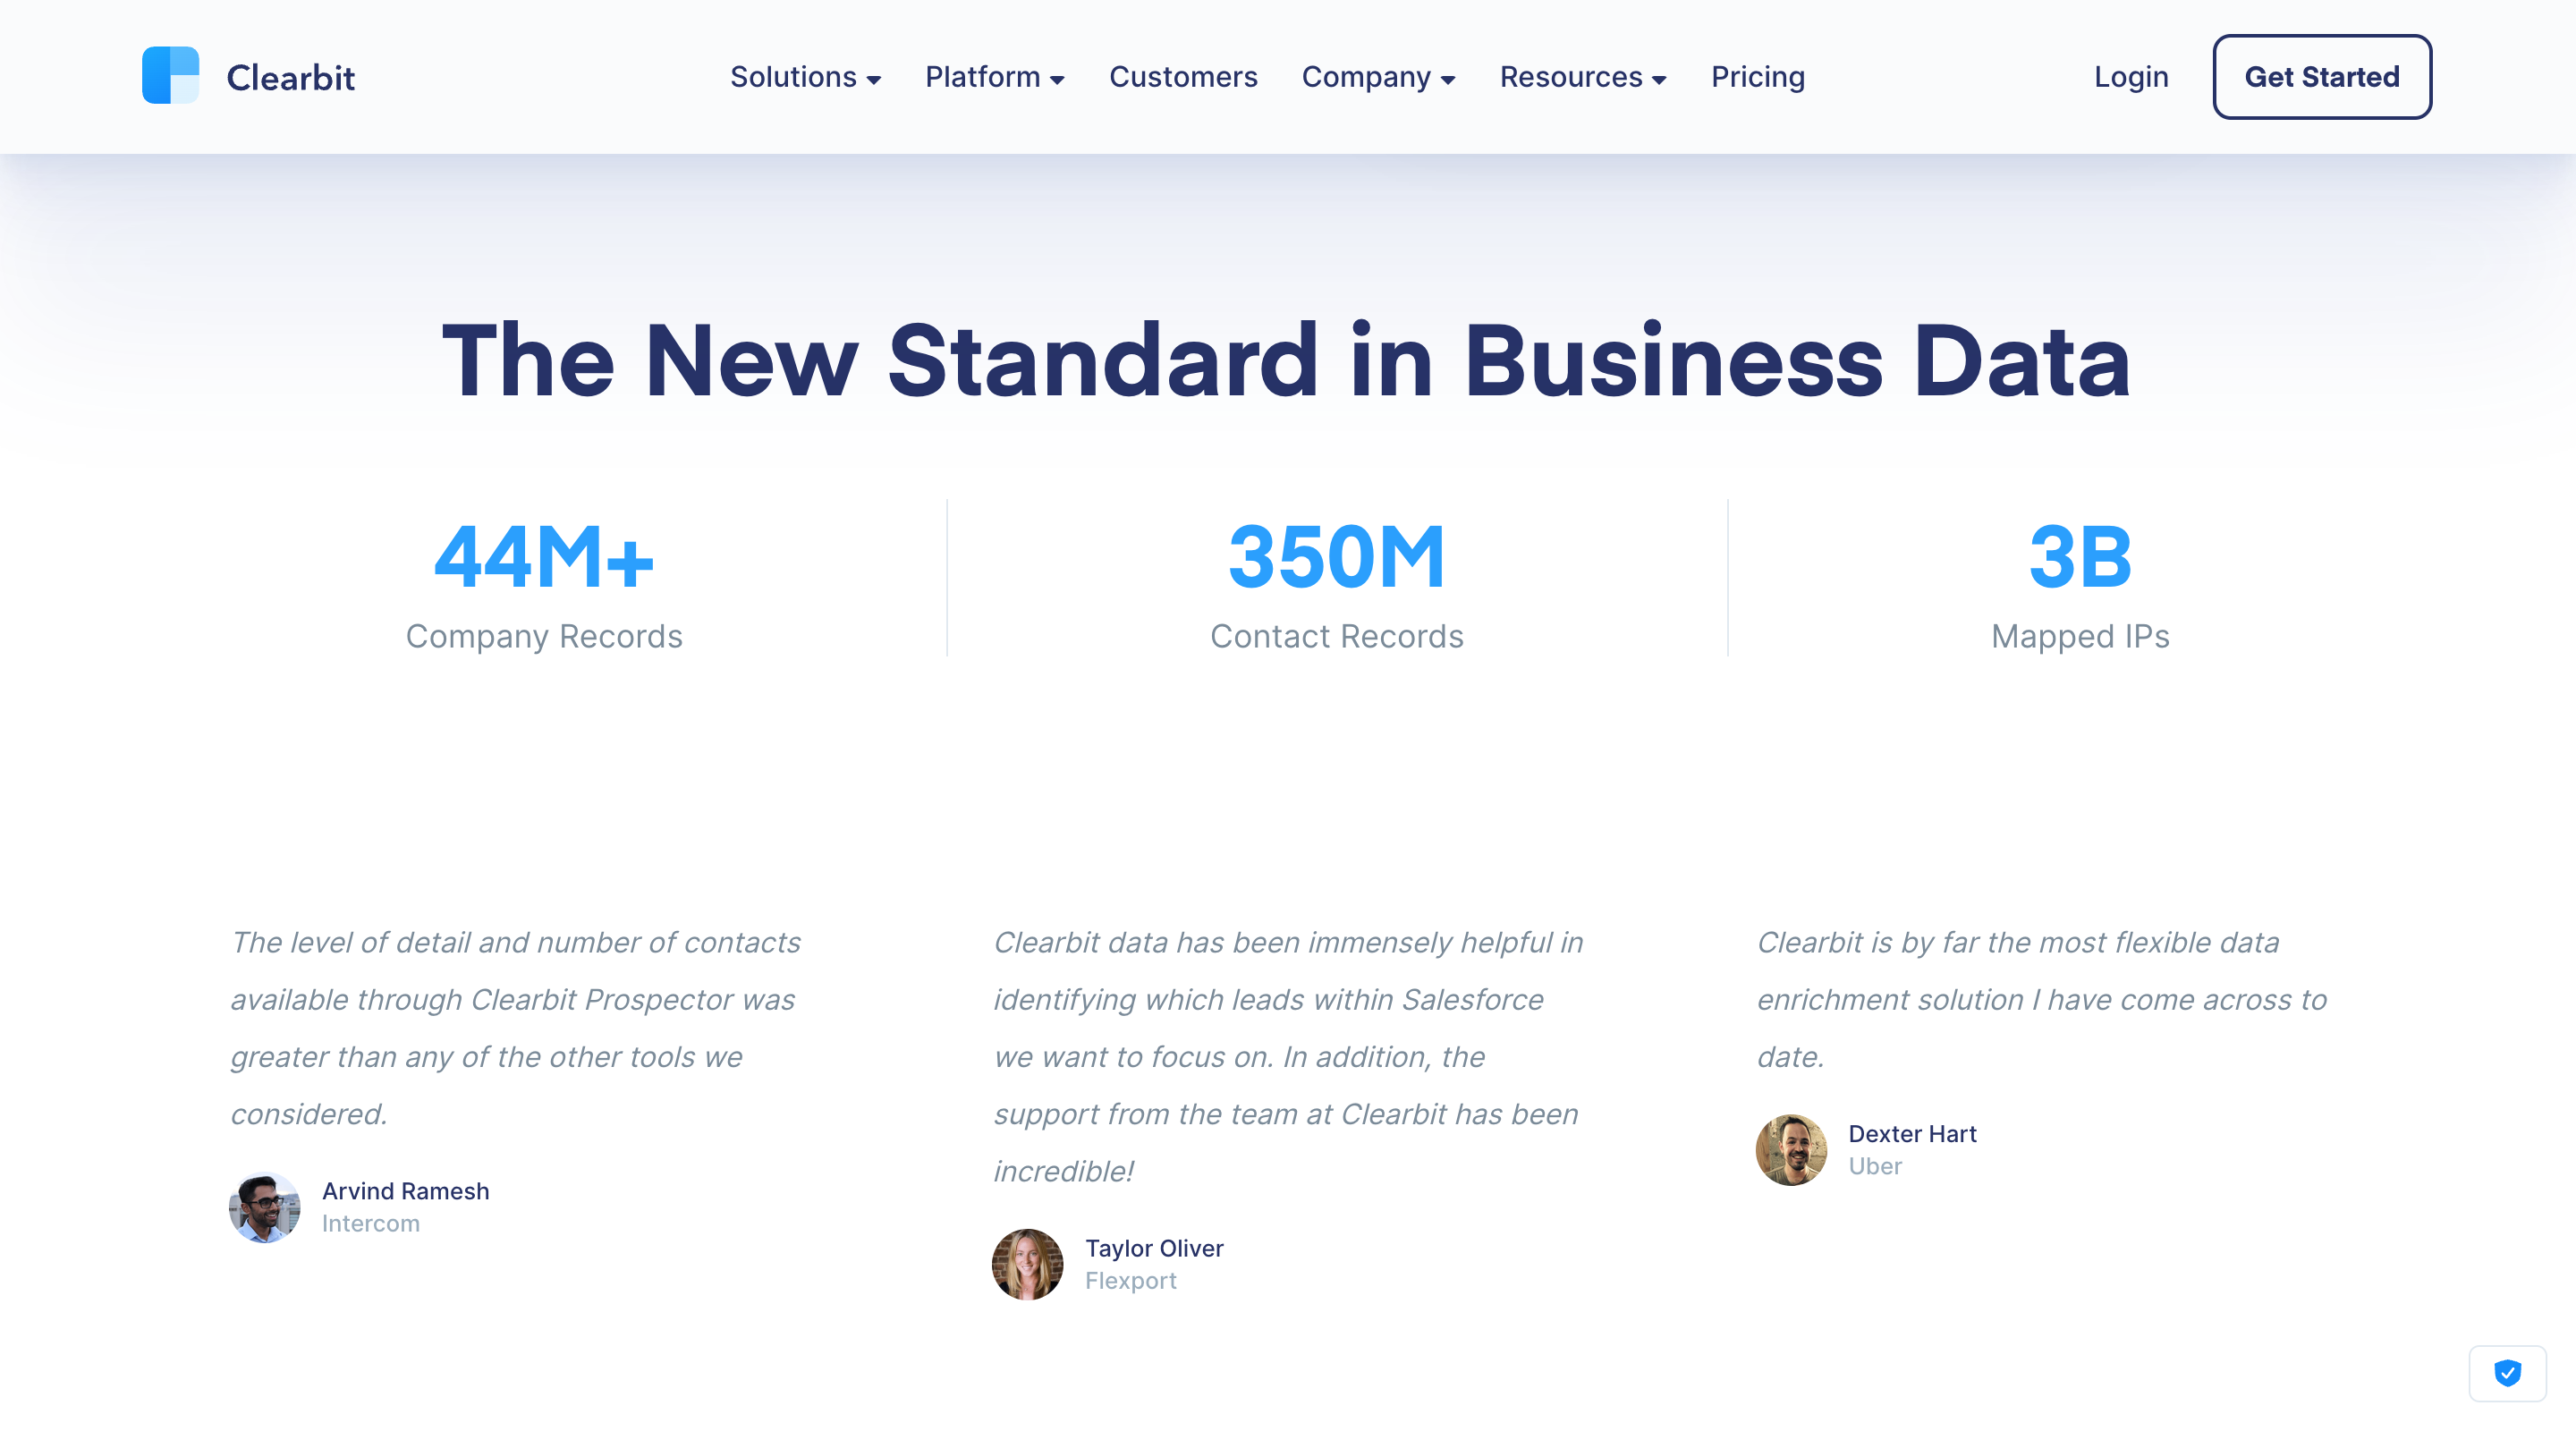 Screenshot of the 'The New Standard in Business Data' section of the Clearbit website. The section contains testimonials from three Clearbit users arranged in three columns.